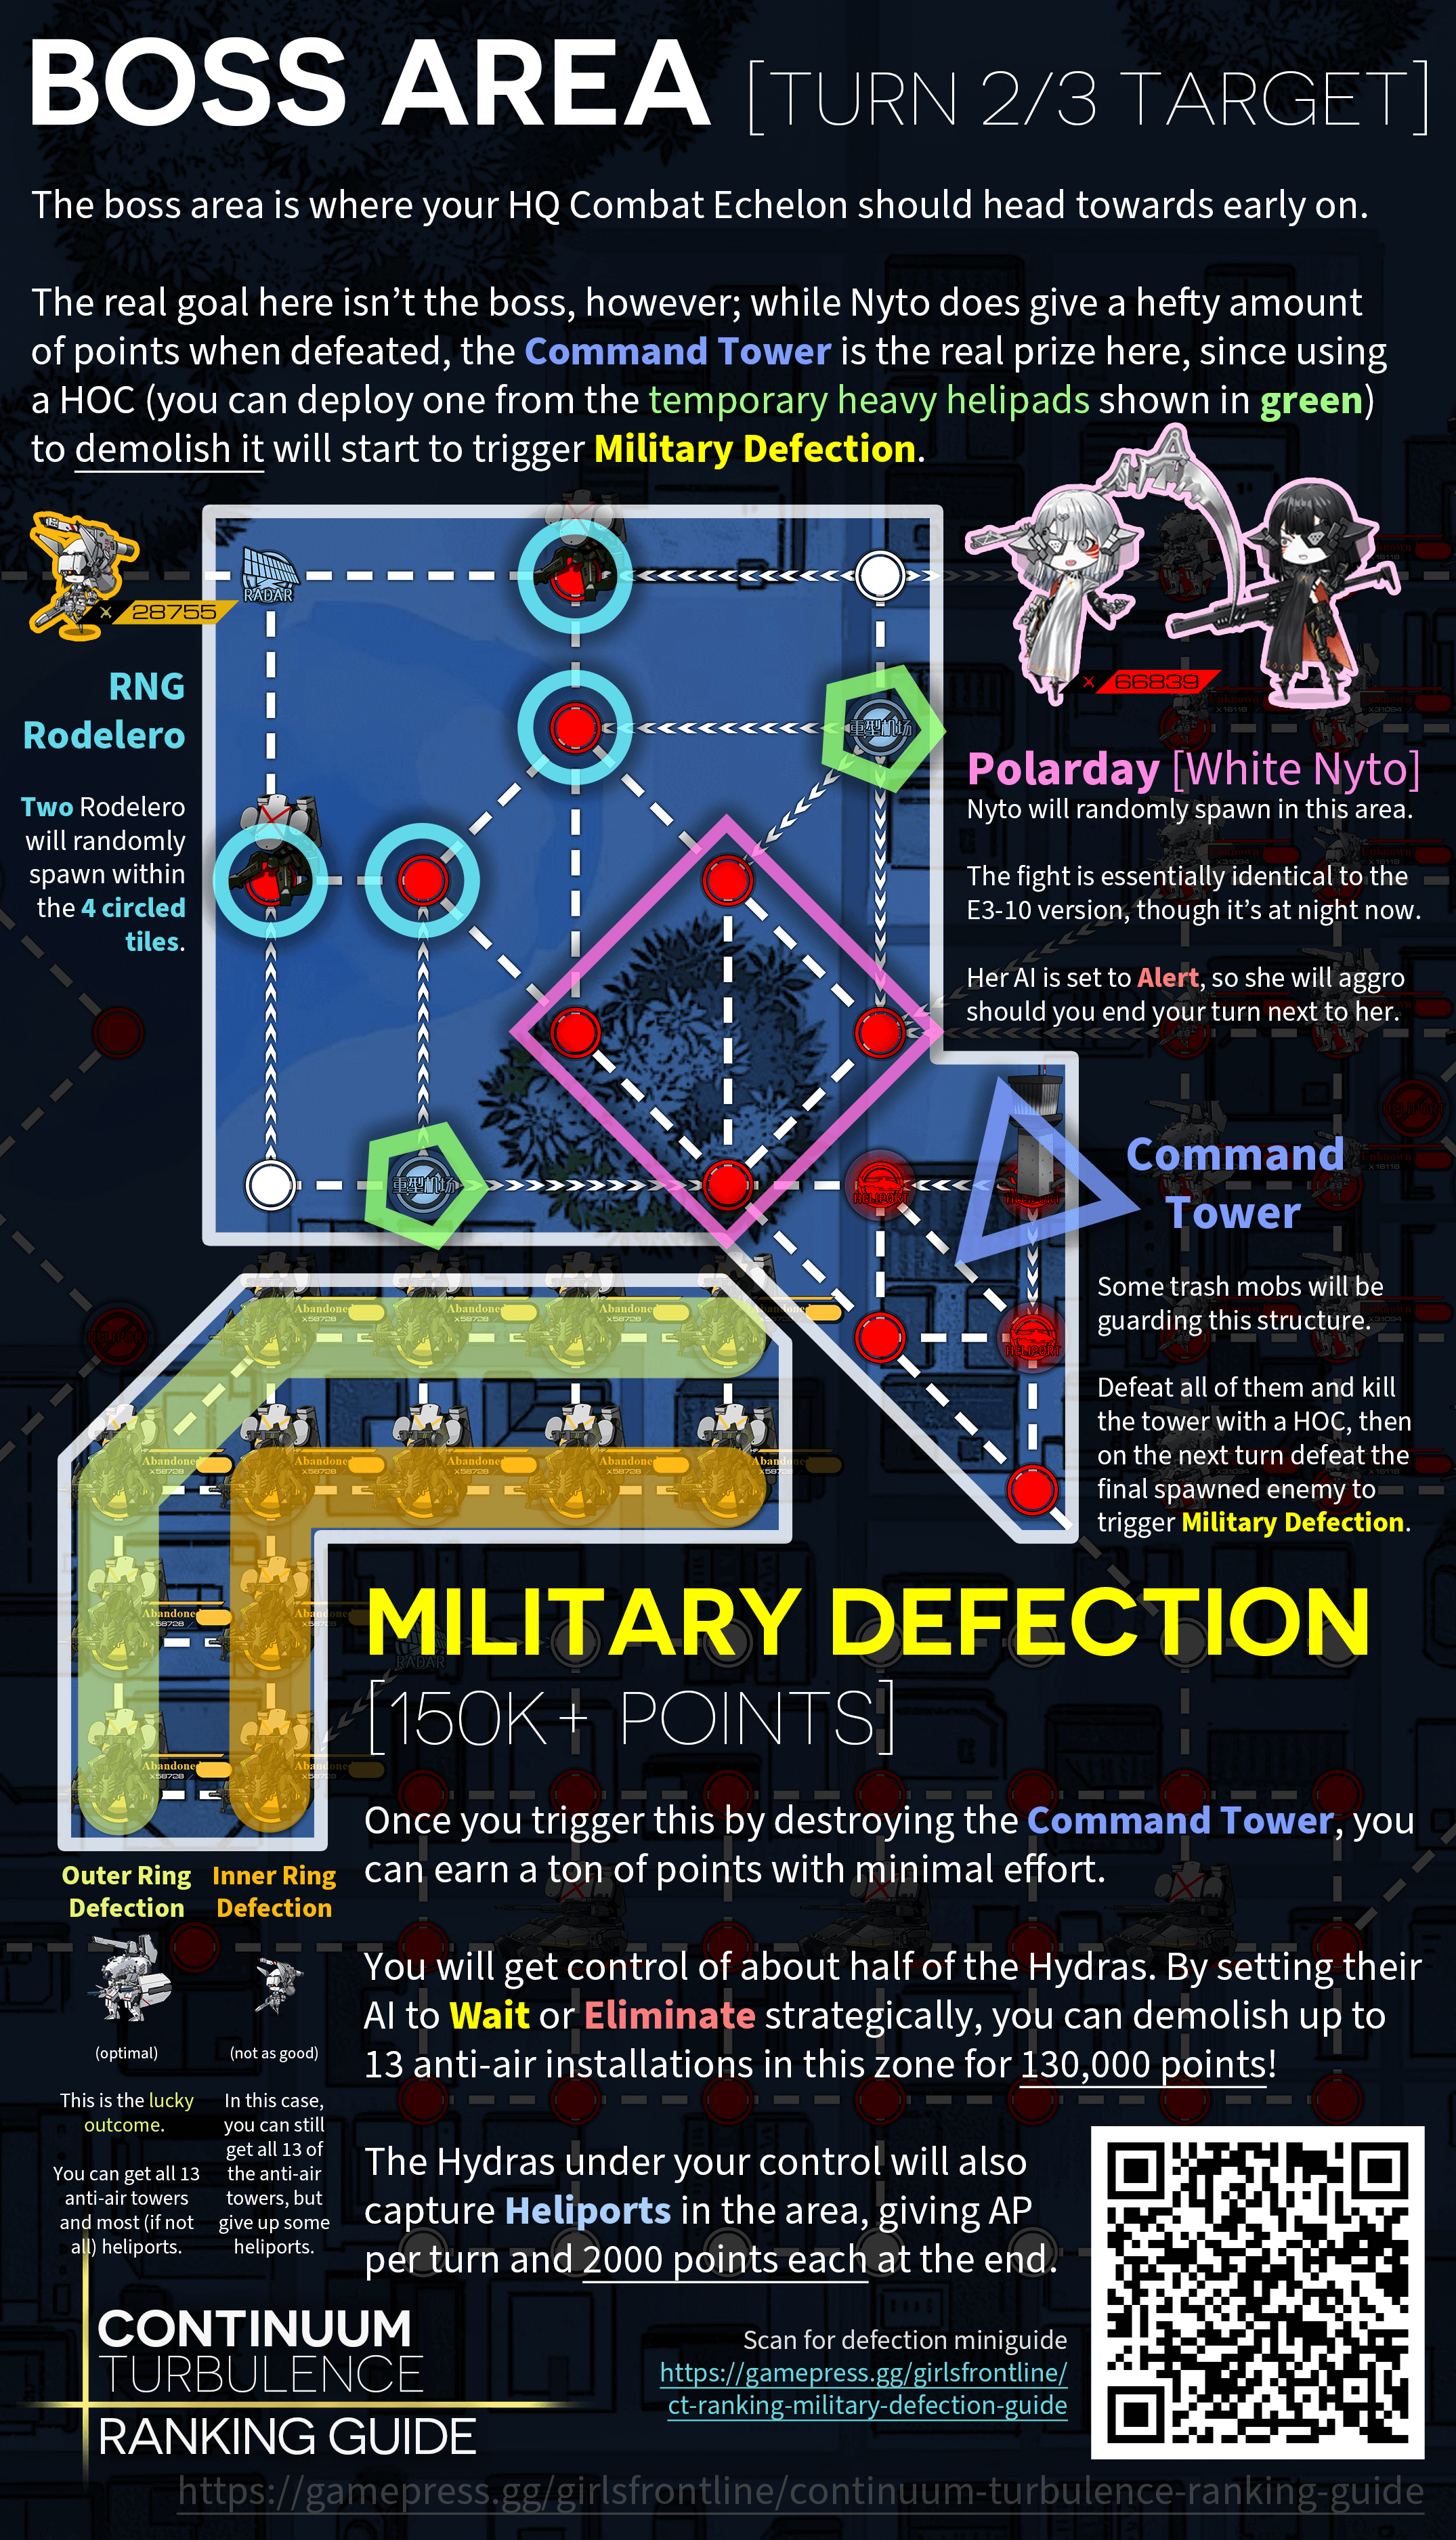 Infographic giving a simplified overview of the Hurricane Rescue ranking map's boss area containing Nyto and the Control Tower as well as the KCCO Hydras.